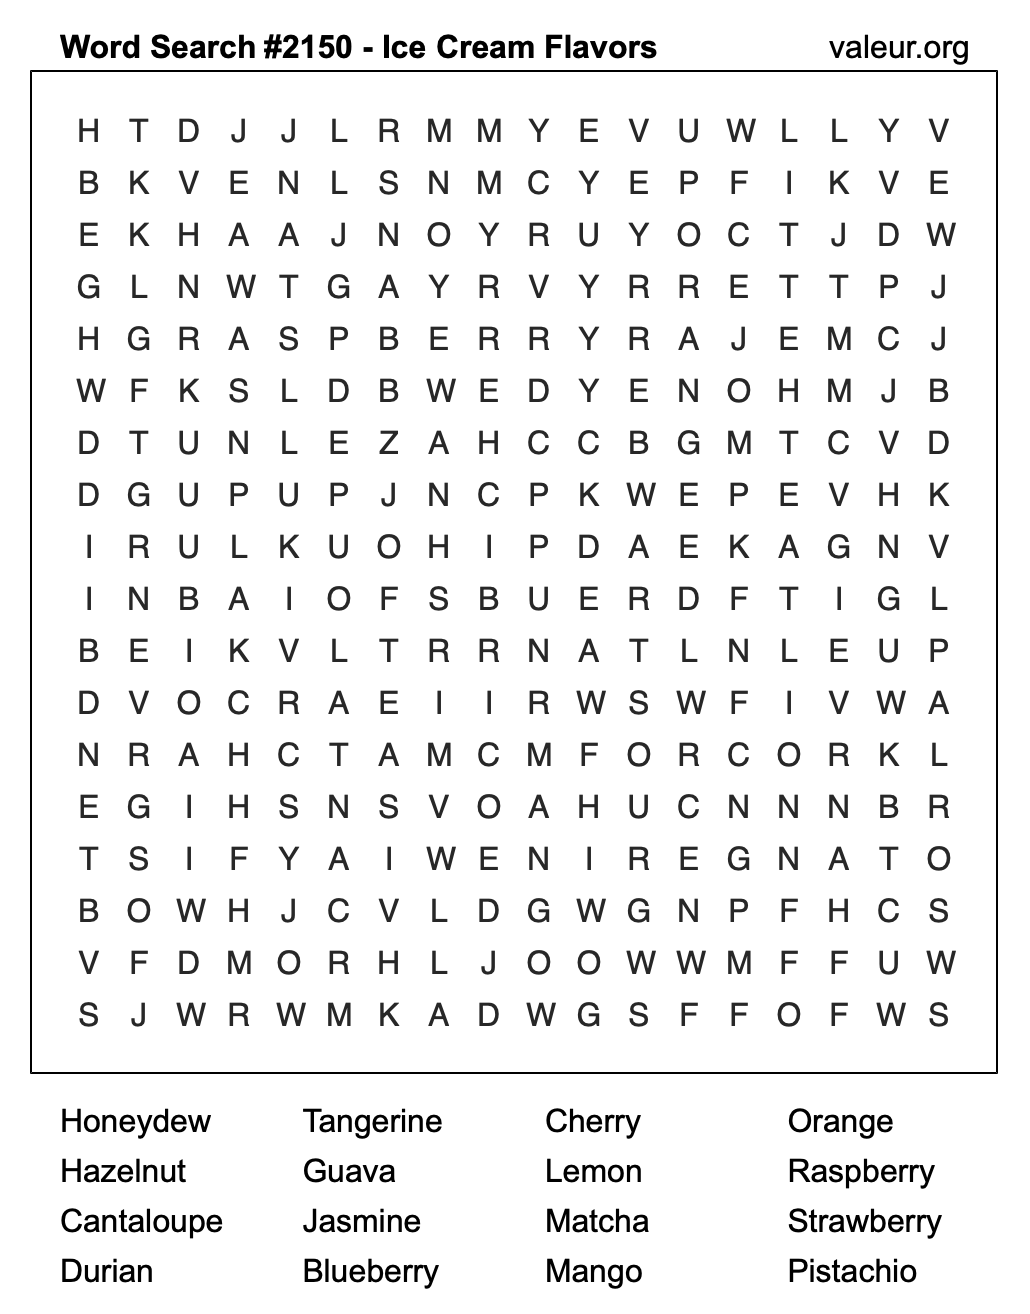 Word Search Puzzle with Ice Cream Flavors #2150